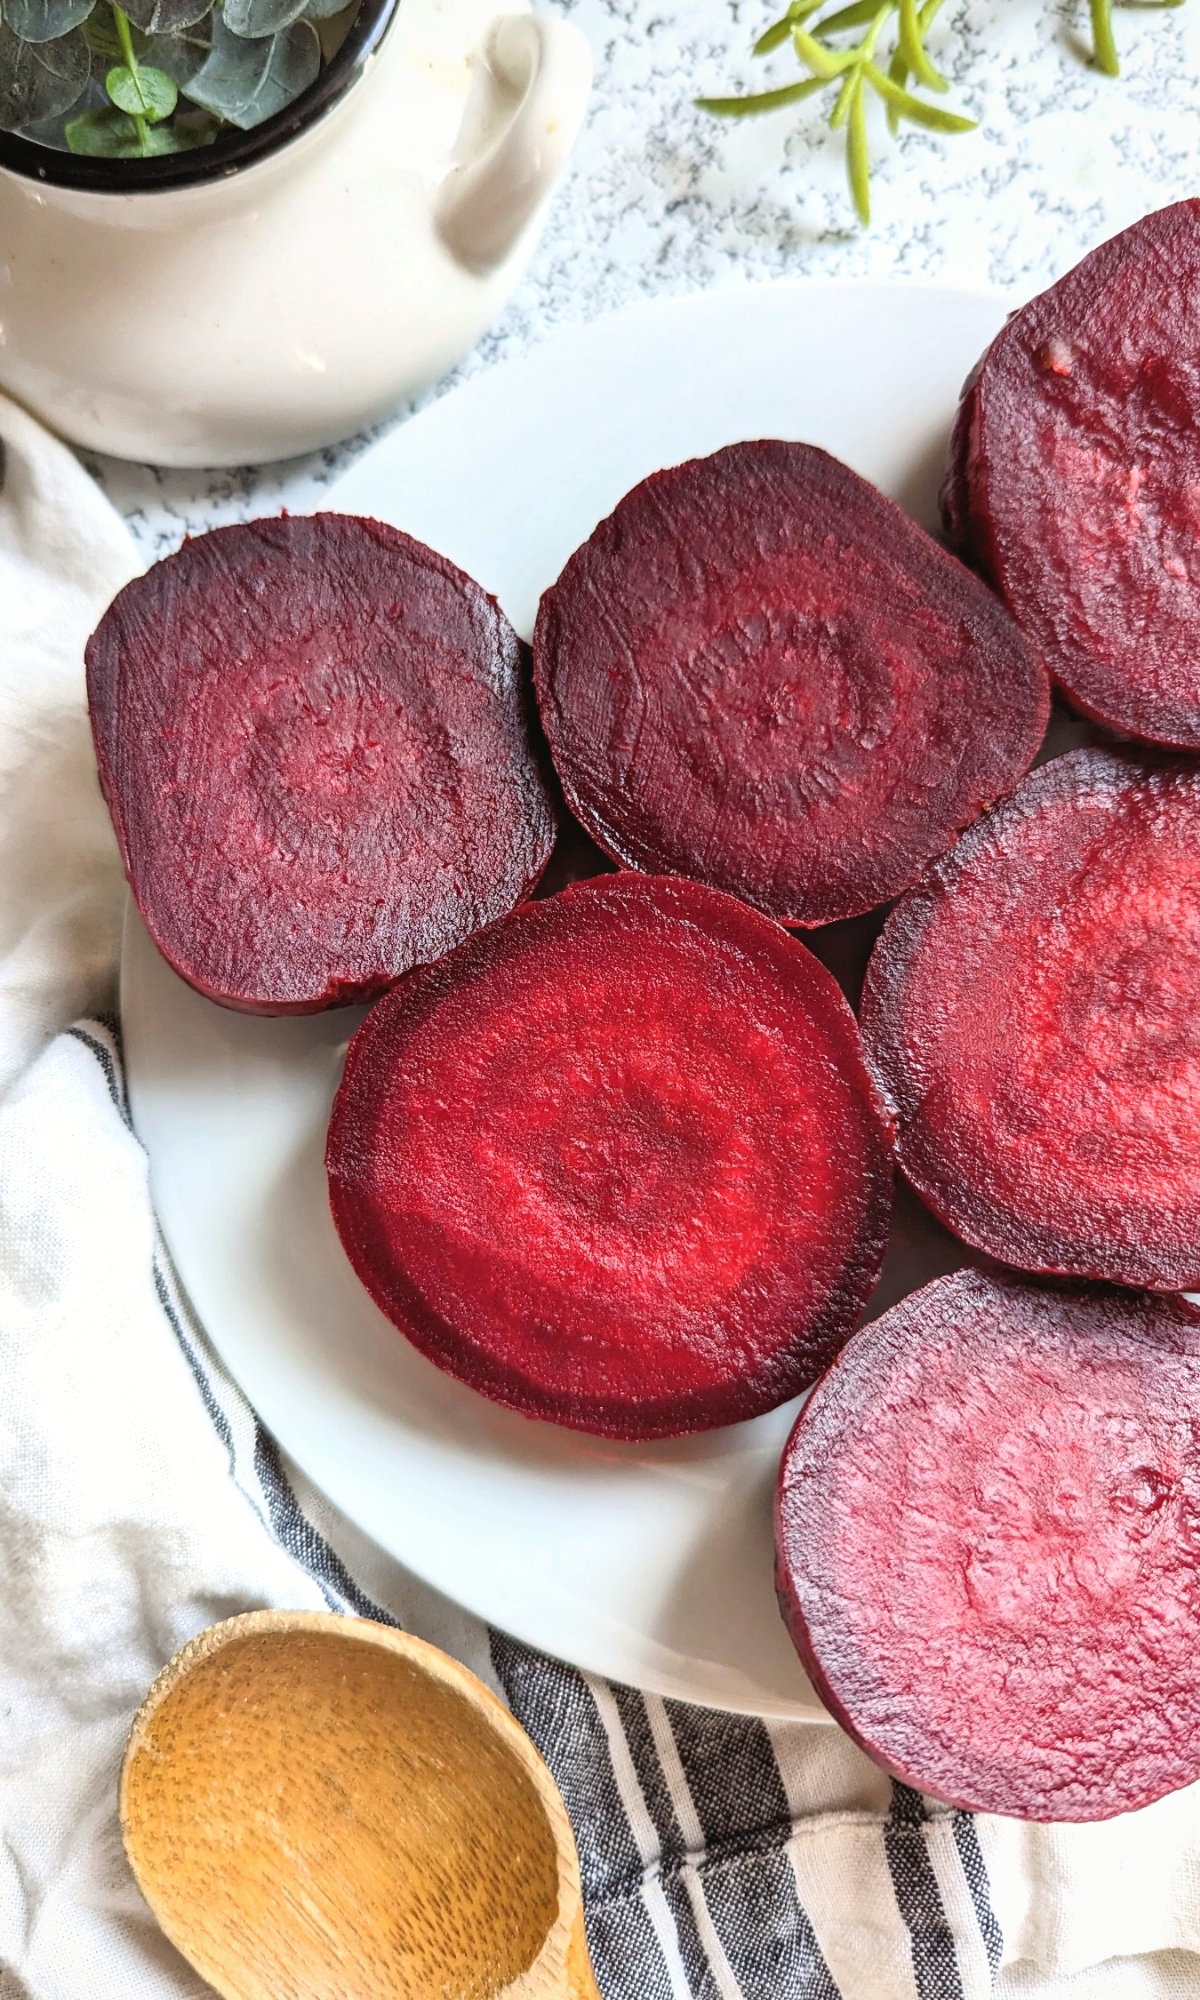 pressure cooker beets recipe best way to cook beets with trivet insert for the instant pot or pressure cooker